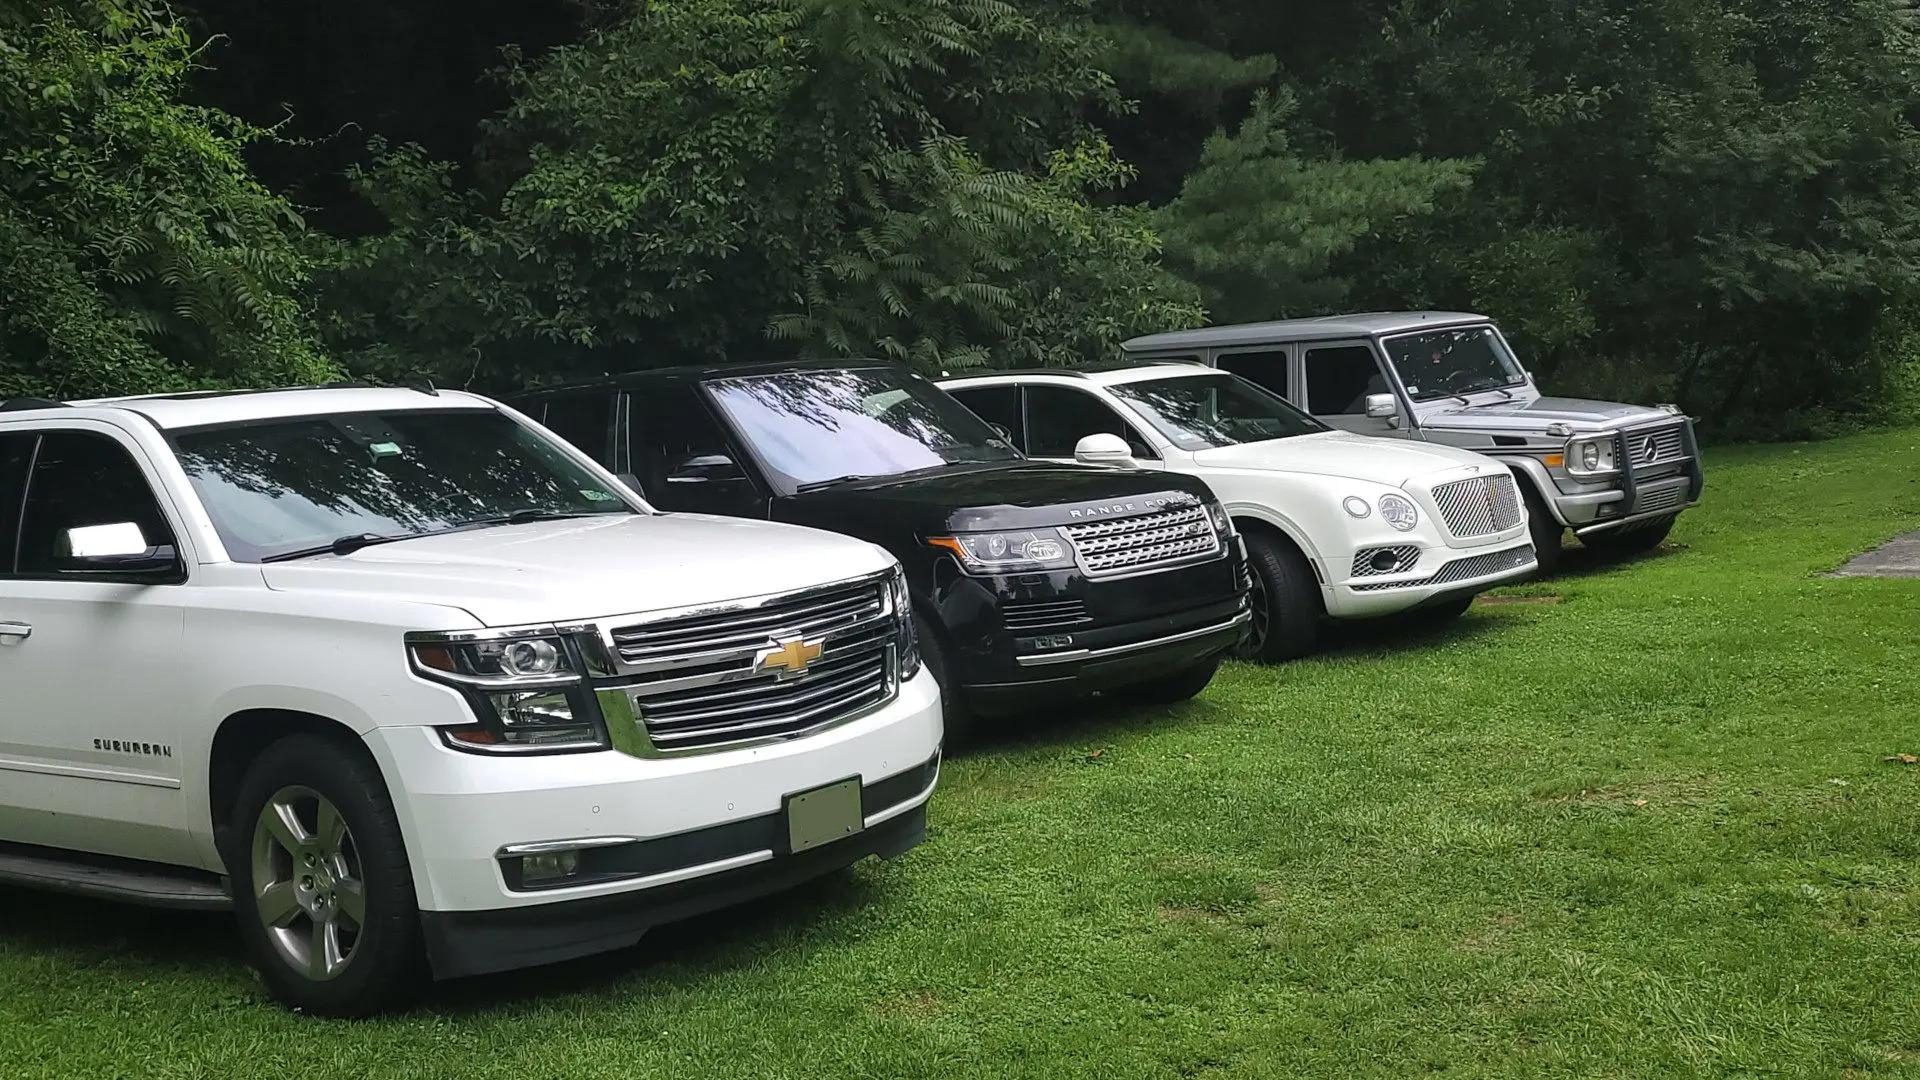 A row of cars parked in the grass.